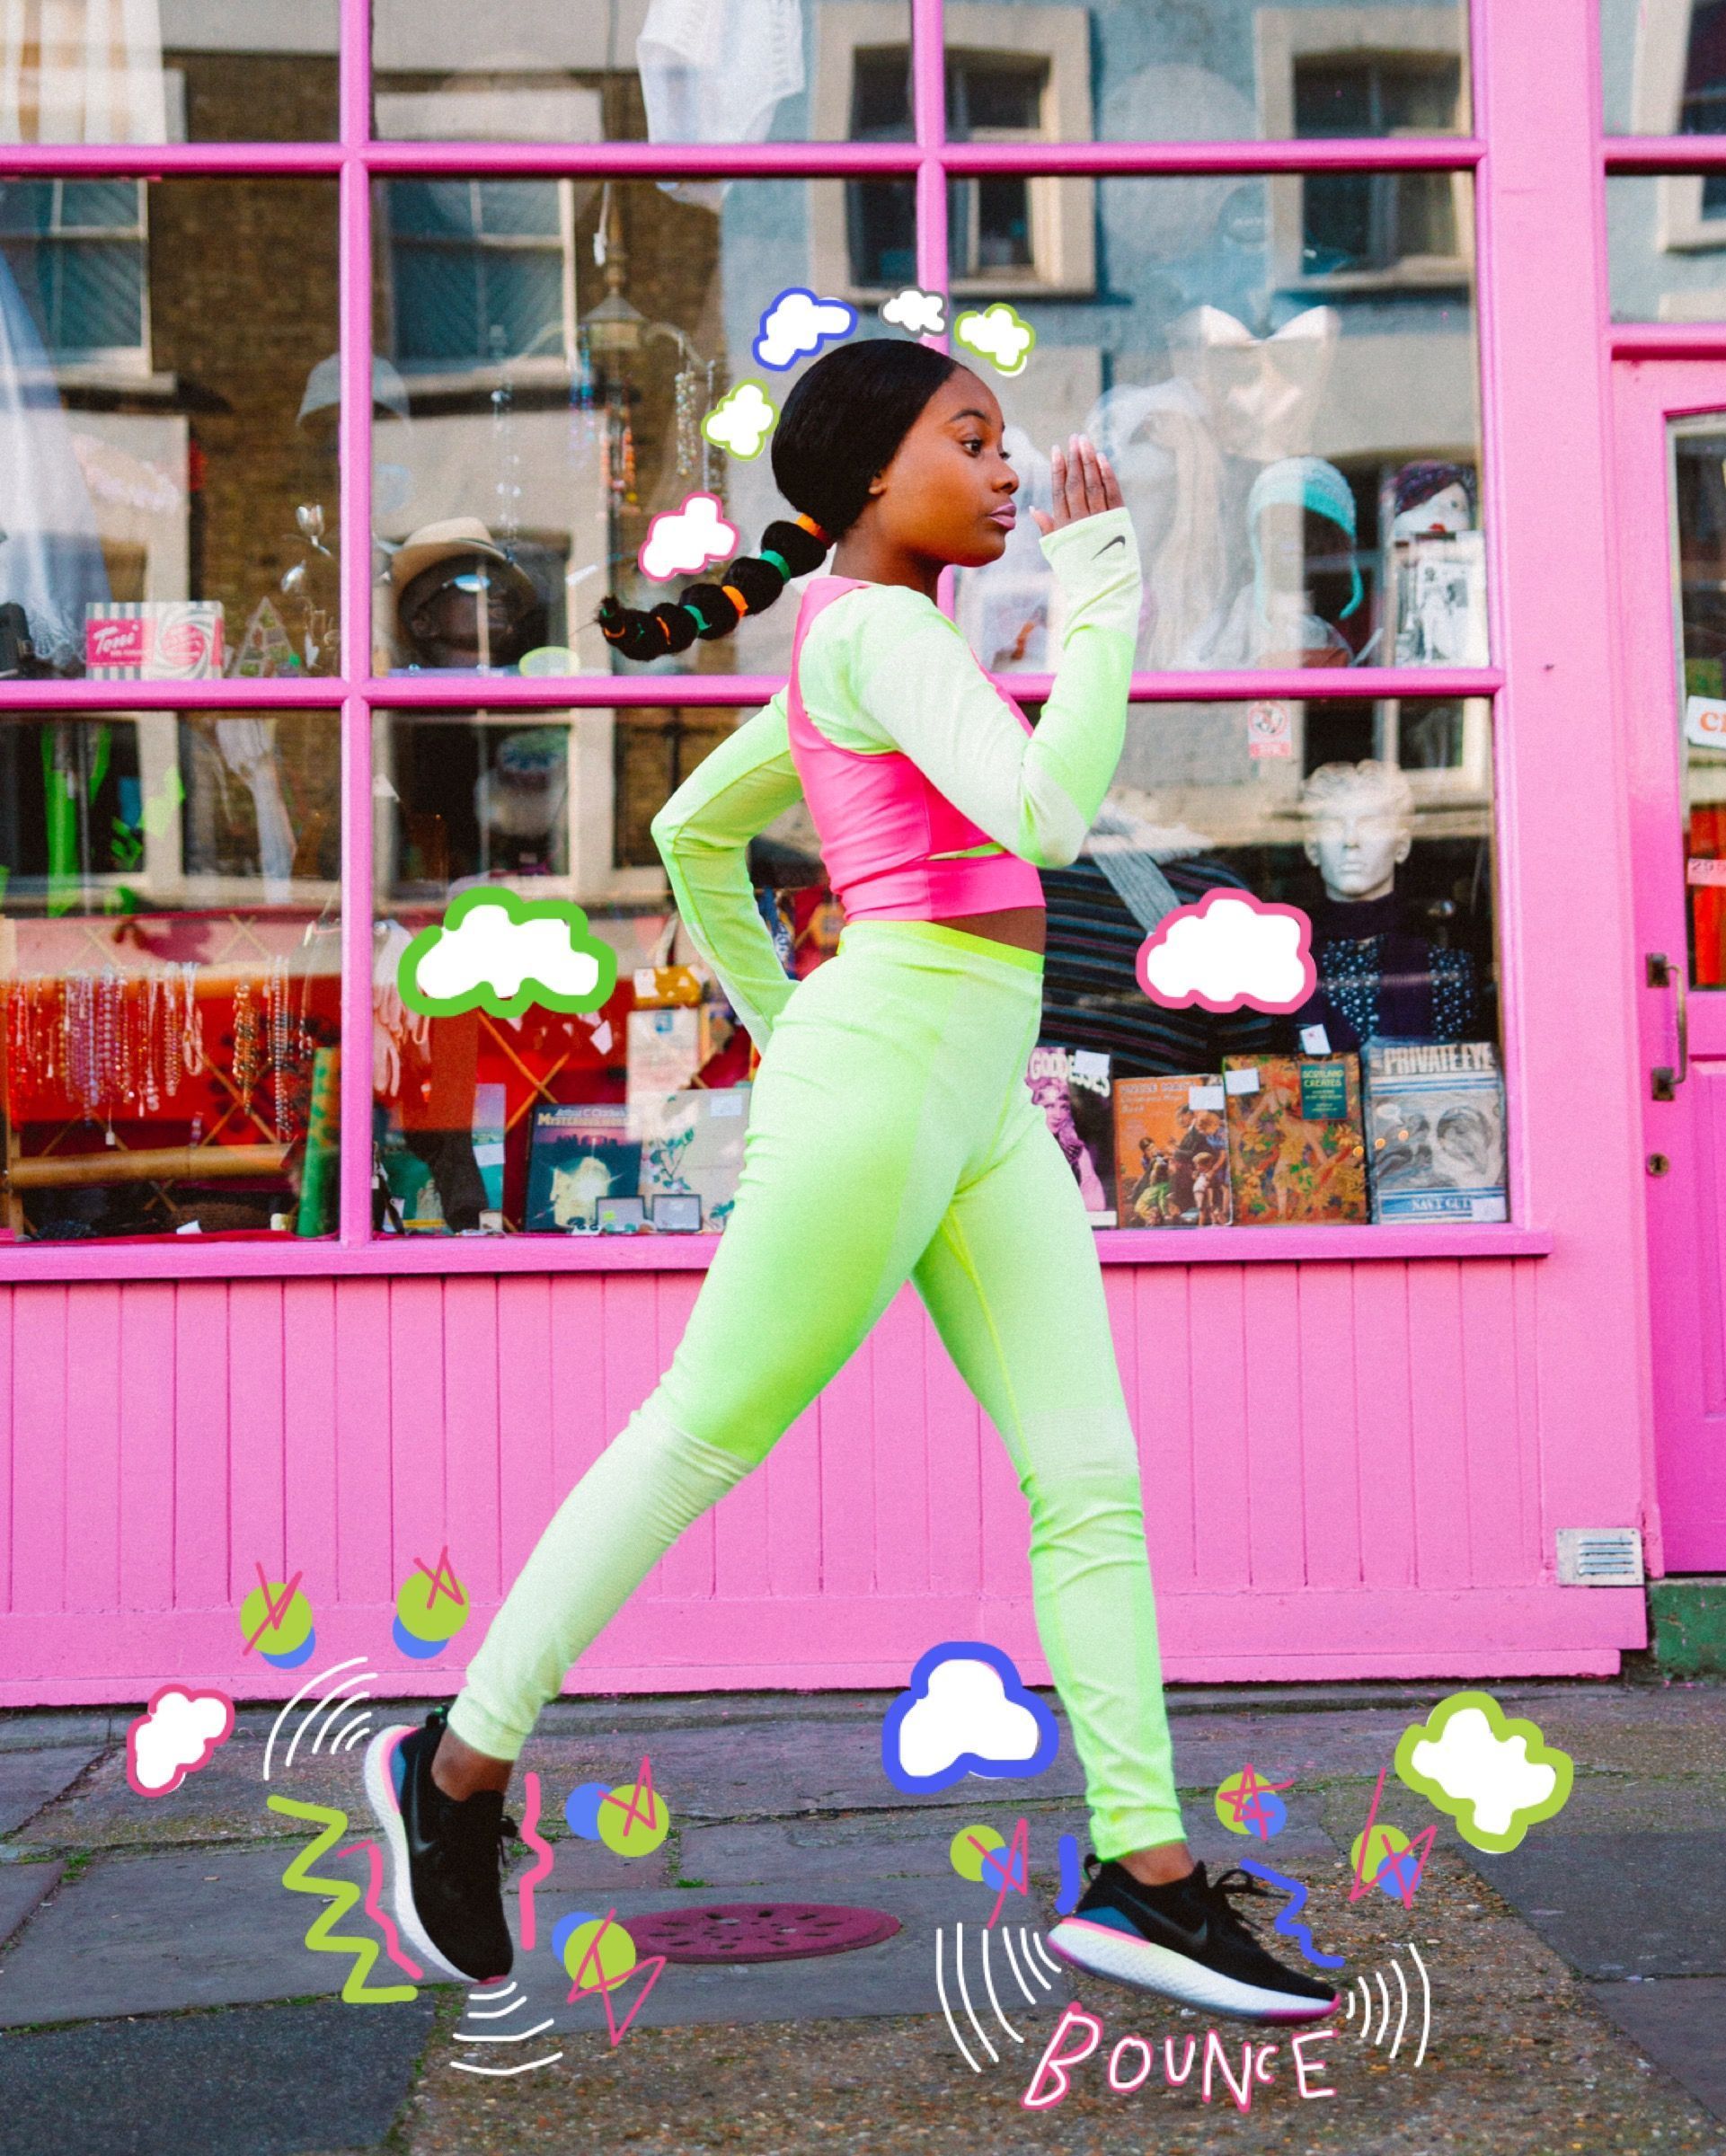 How young Fashion Connoisseur [@Michemingg] uses running to escape mental blocks #KeepItMovingGUAP #NikeReact